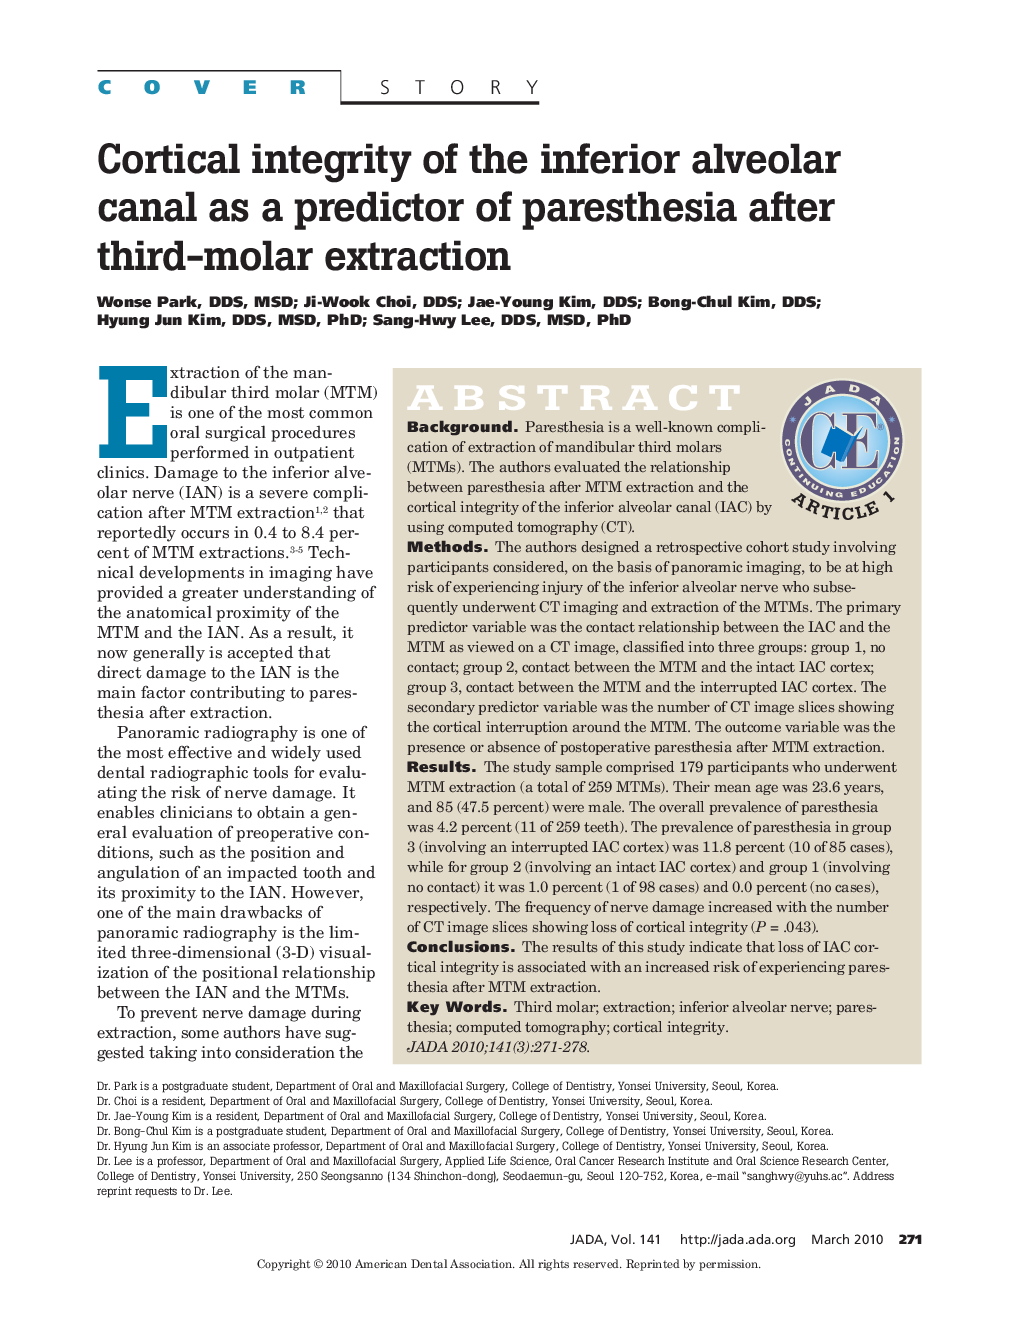 Cortical Integrity of the Inferior Alveolar Canal as a Predictor of Paresthesia After Third-Molar Extraction 